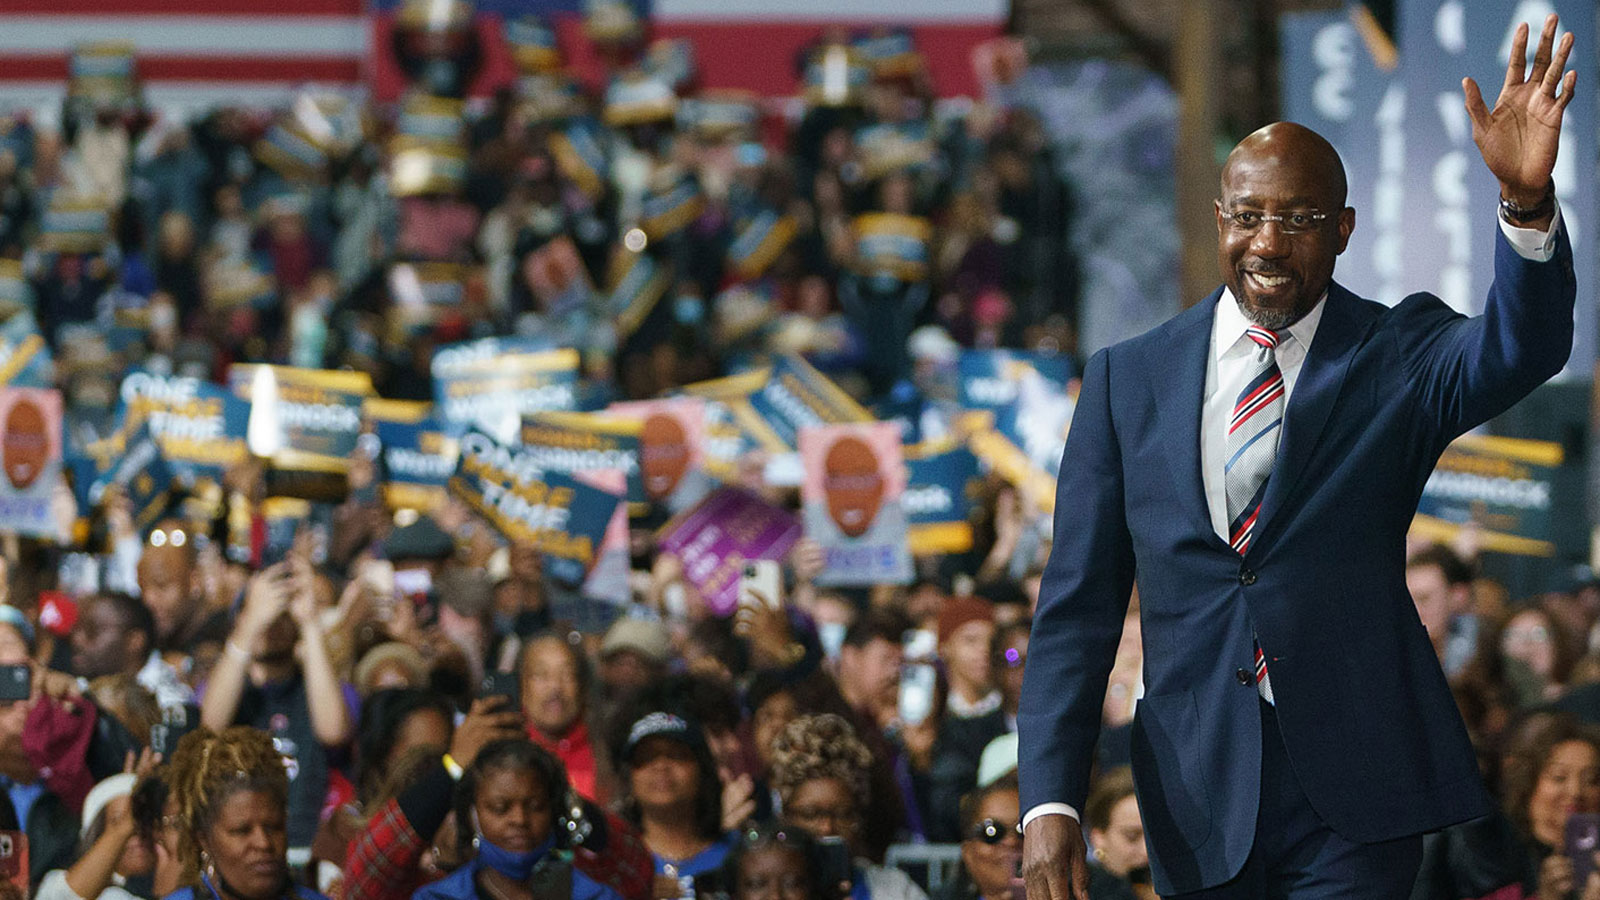 US Sen. Raphael Warnock walks on stage during a campaign rally in Atlanta on Thursday.